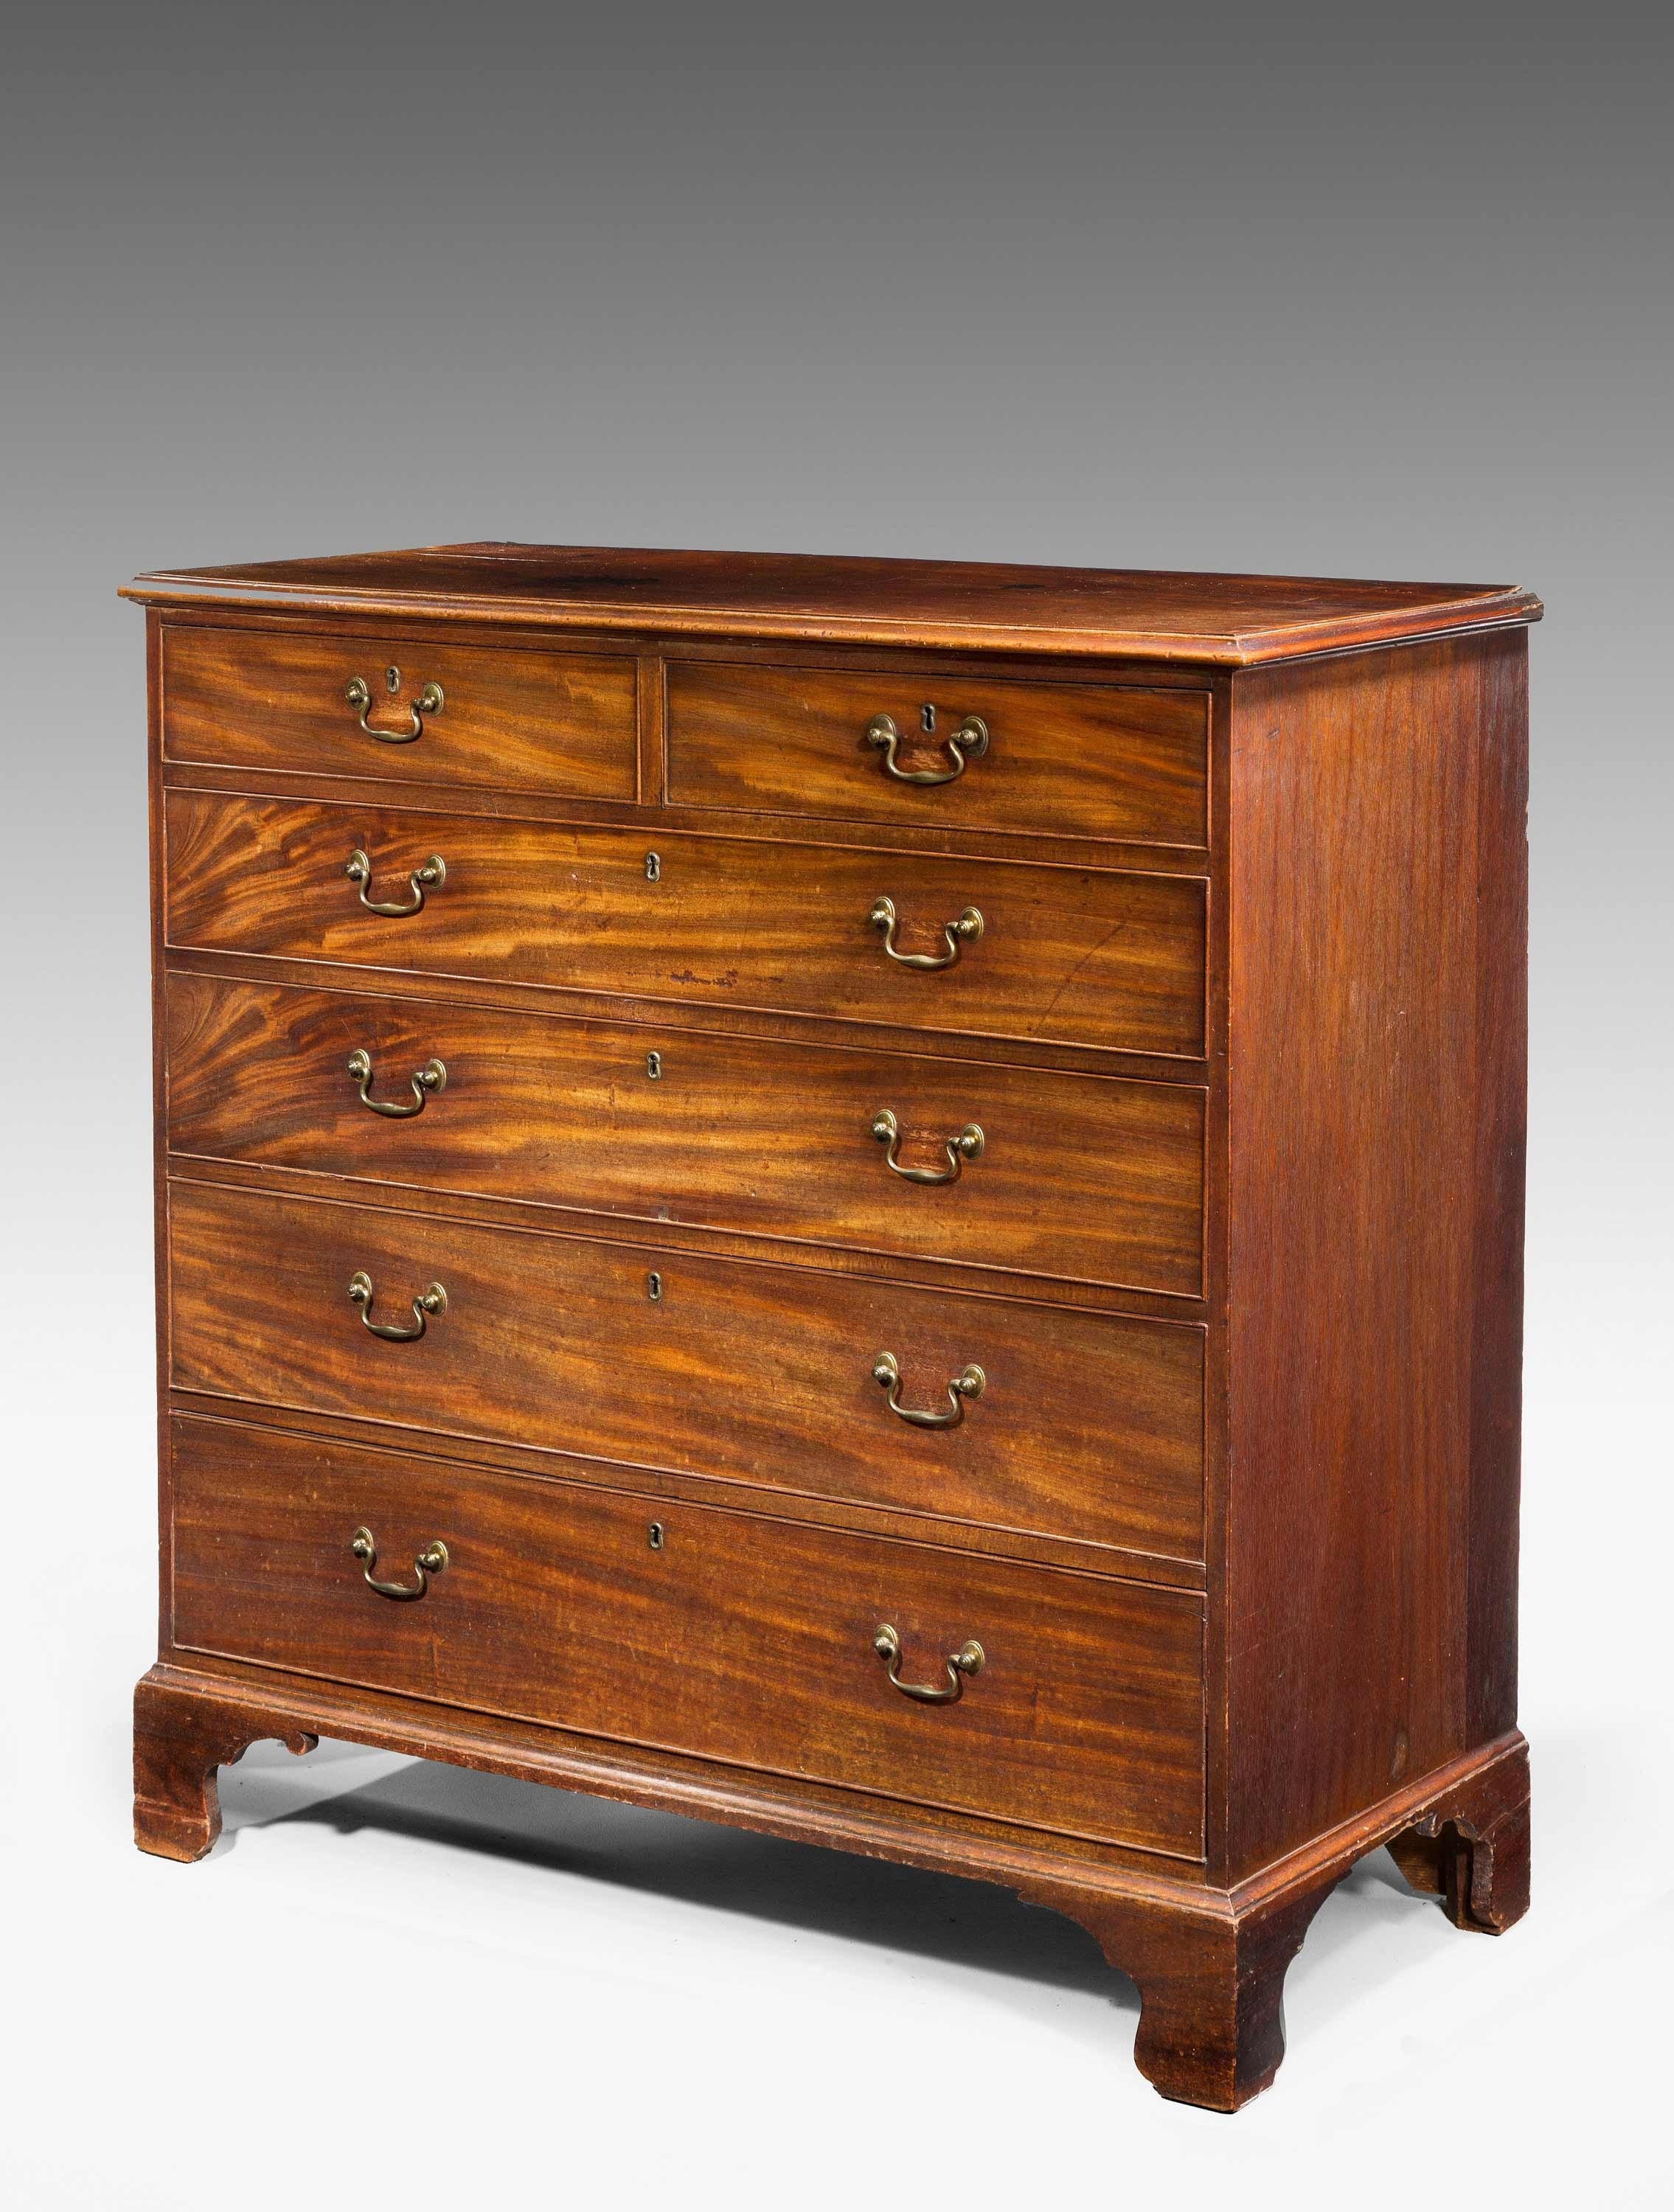 George III Period Mahogany Chest of Drawers with Contrasting Striations